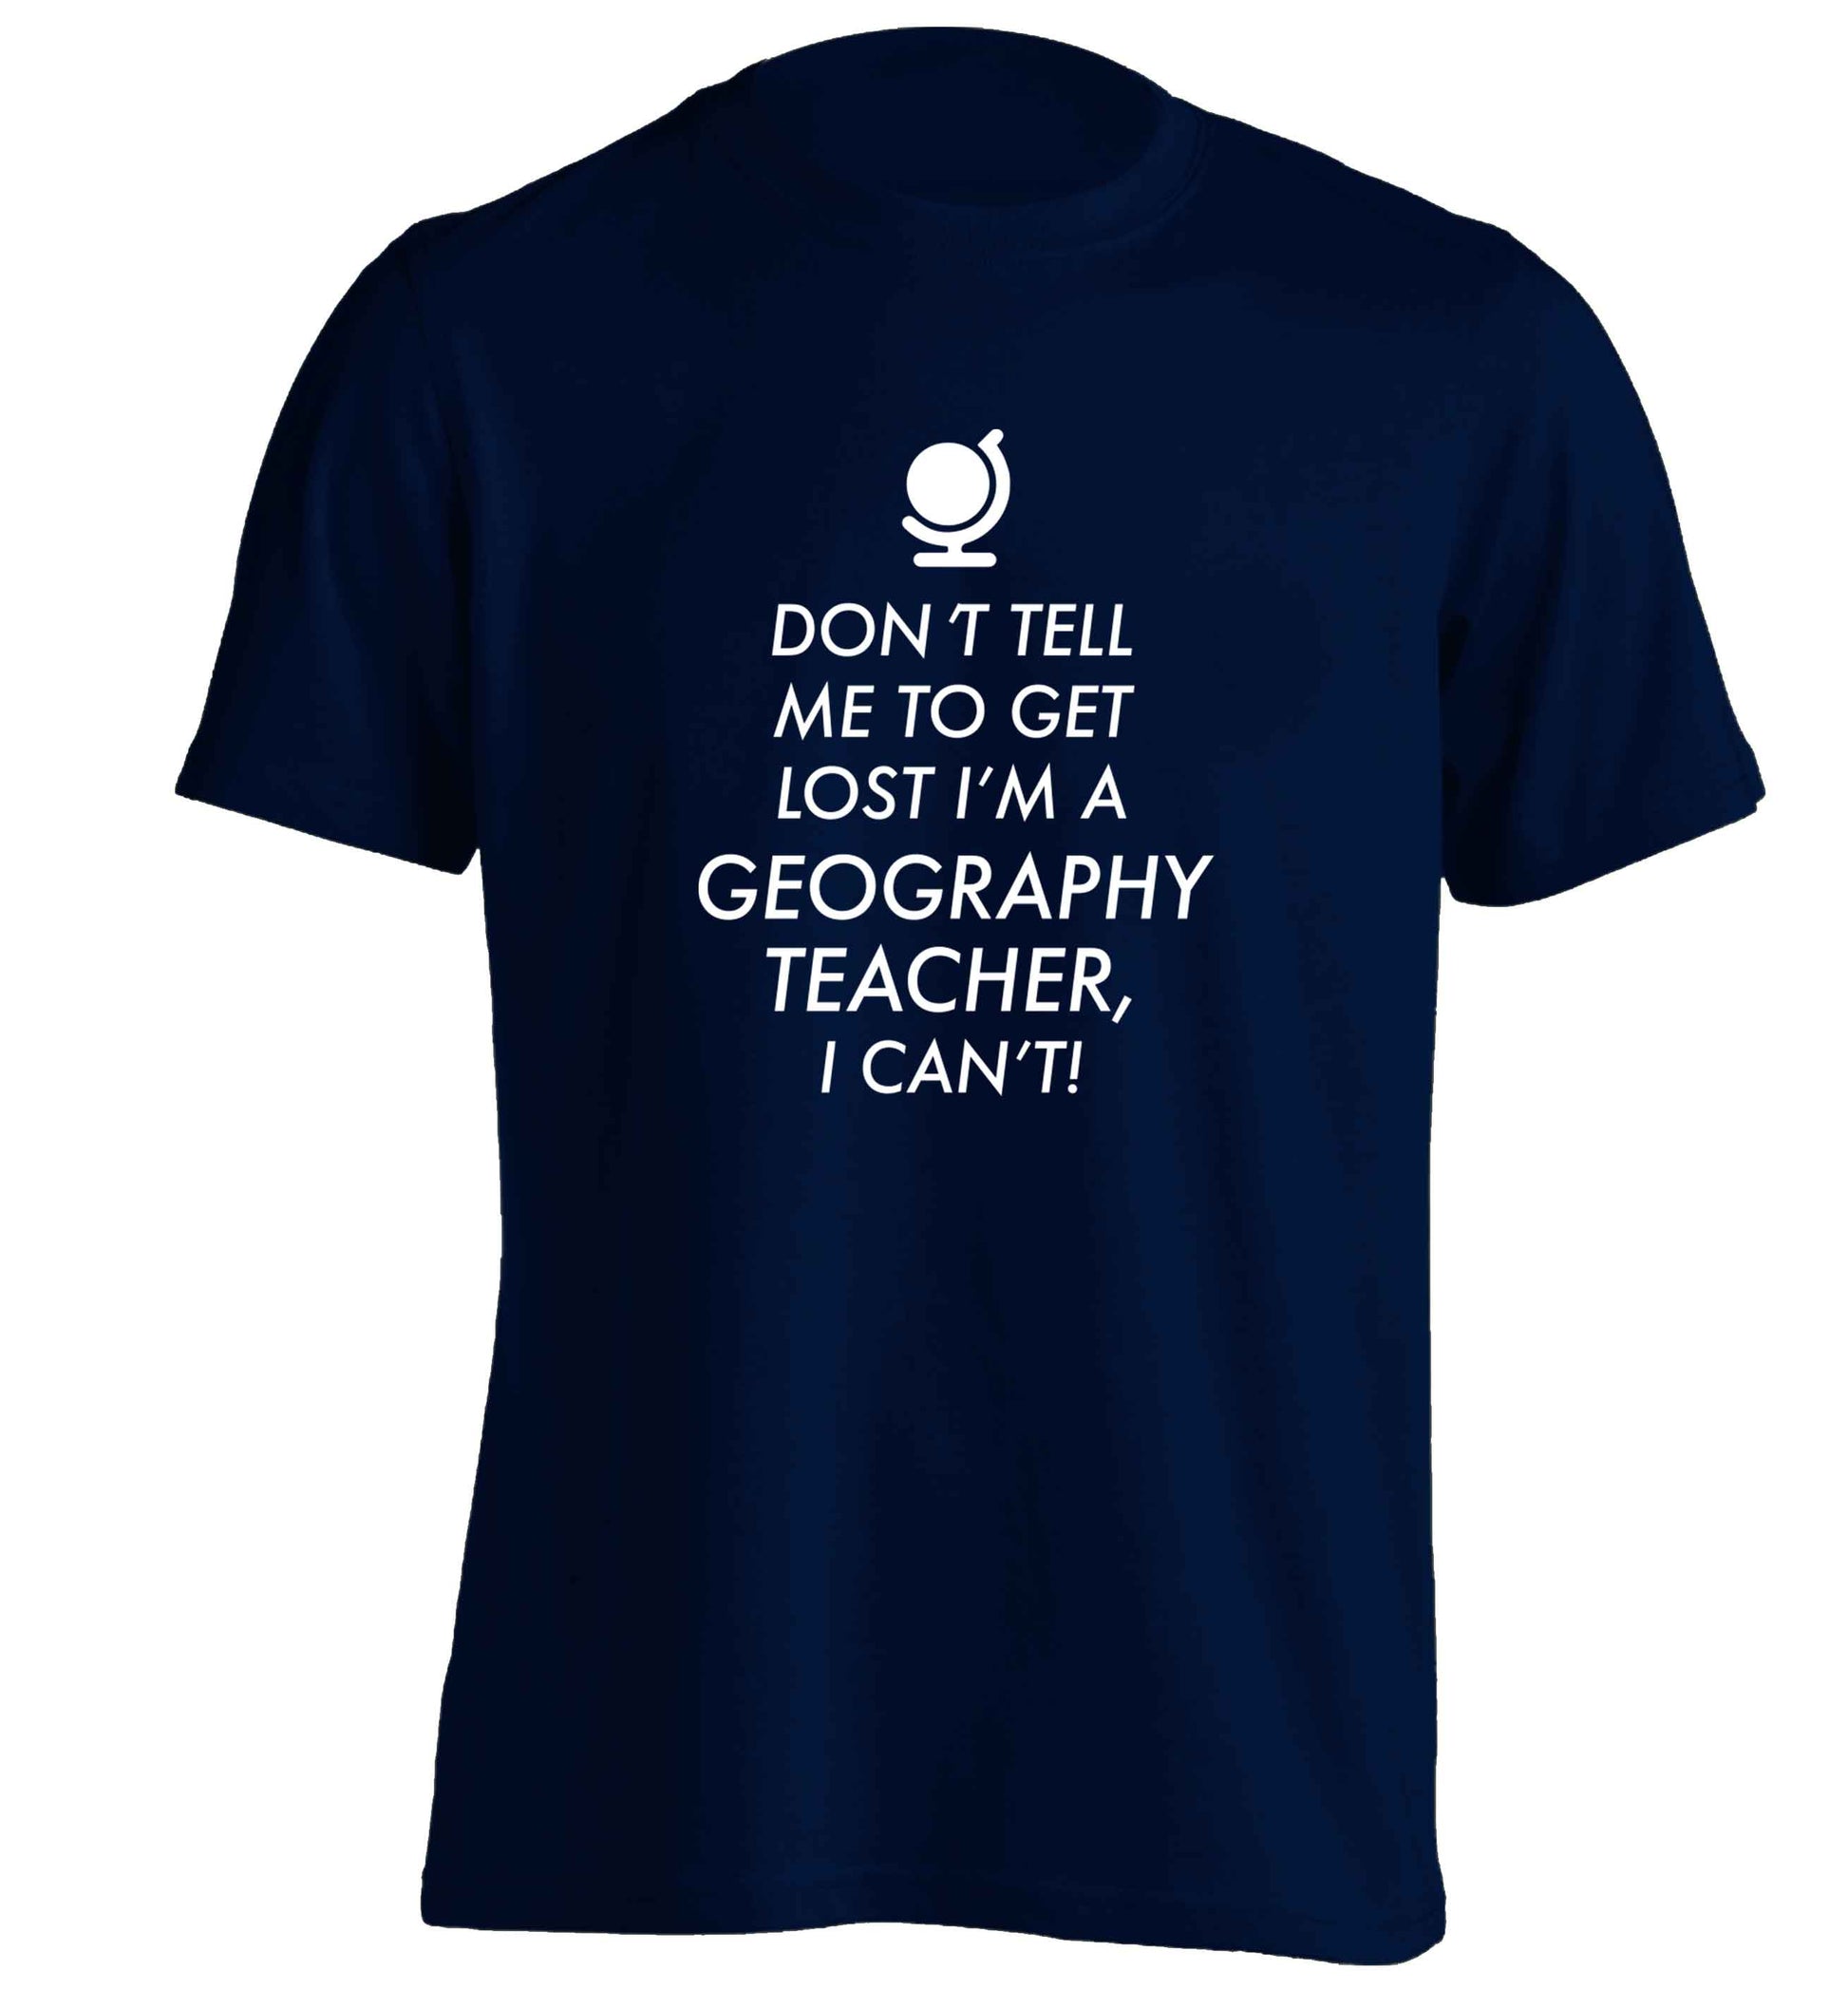 Don't tell me to get lost I'm a geography teacher, I can't adults unisex navy Tshirt 2XL